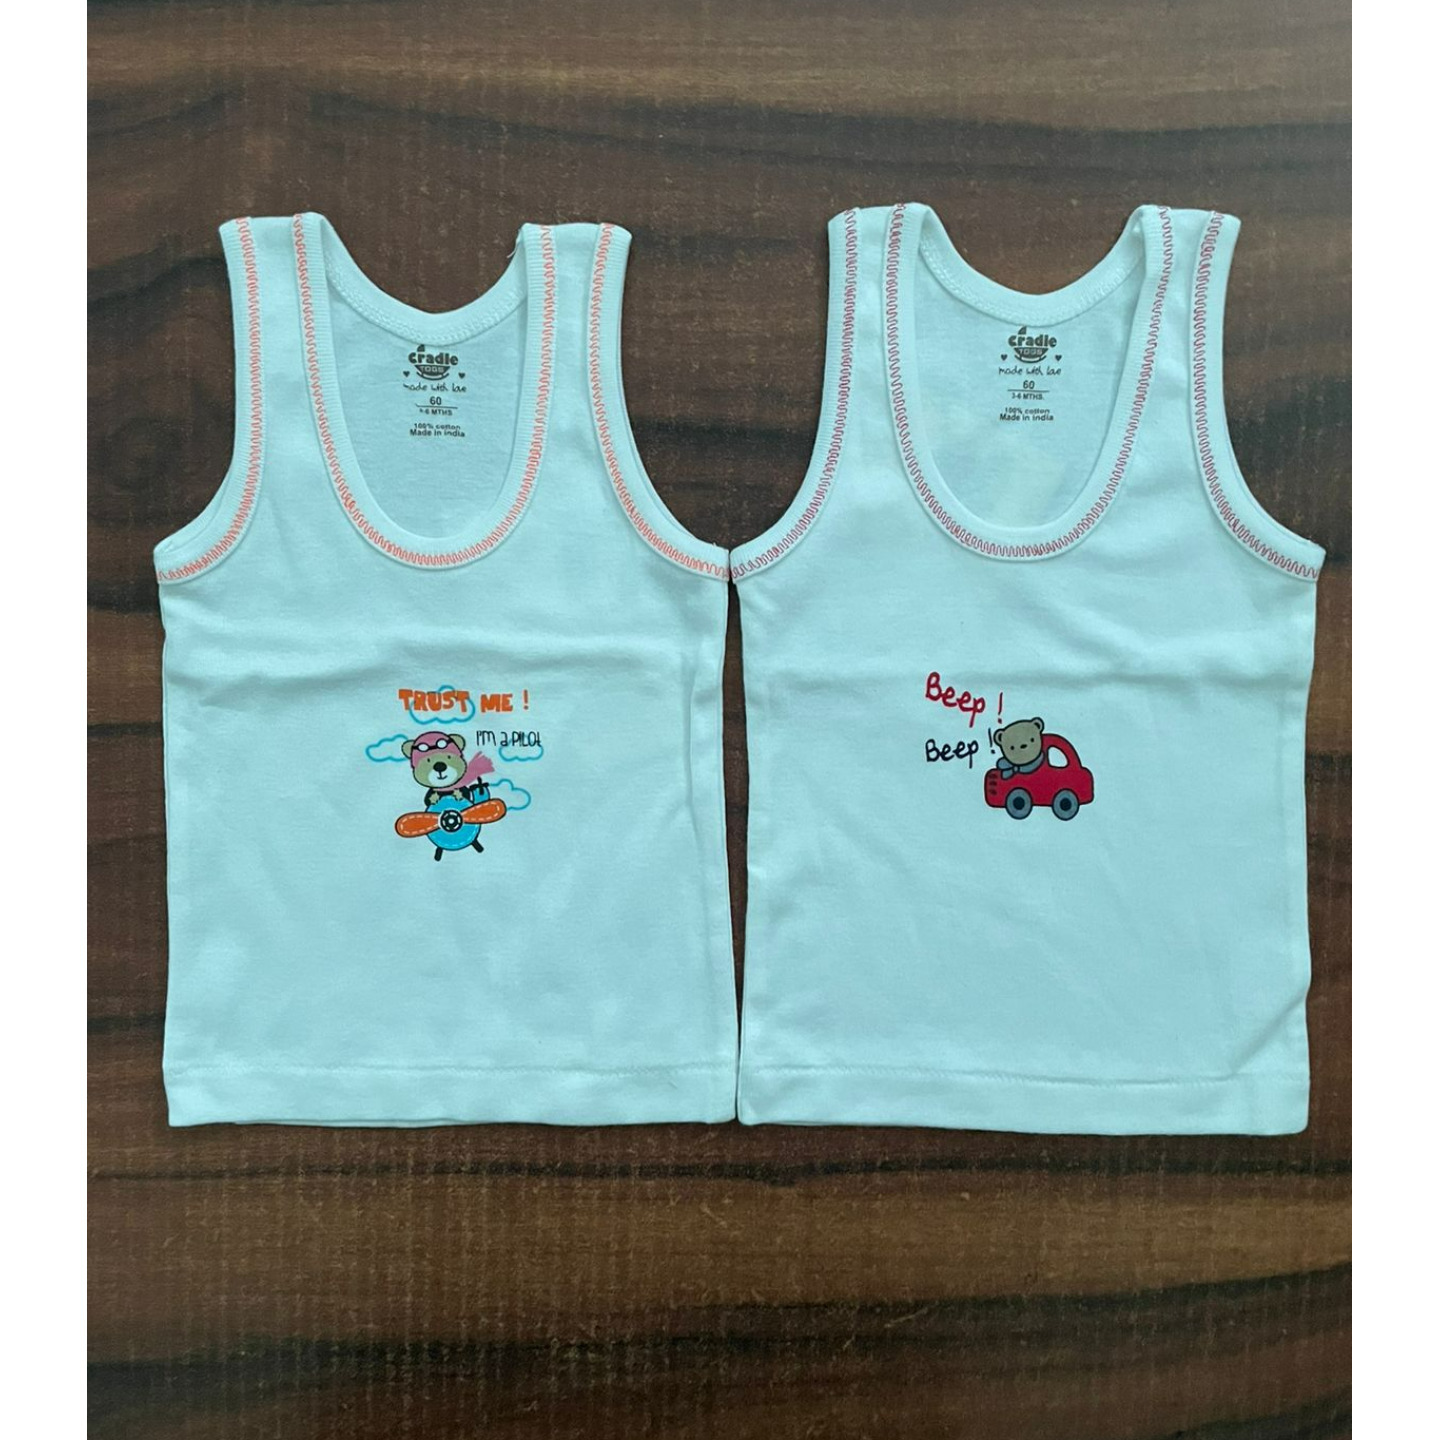 Newborn Infant Cradle Togs Unisex Plain White Vests Pack of 2 Rs 250 Only